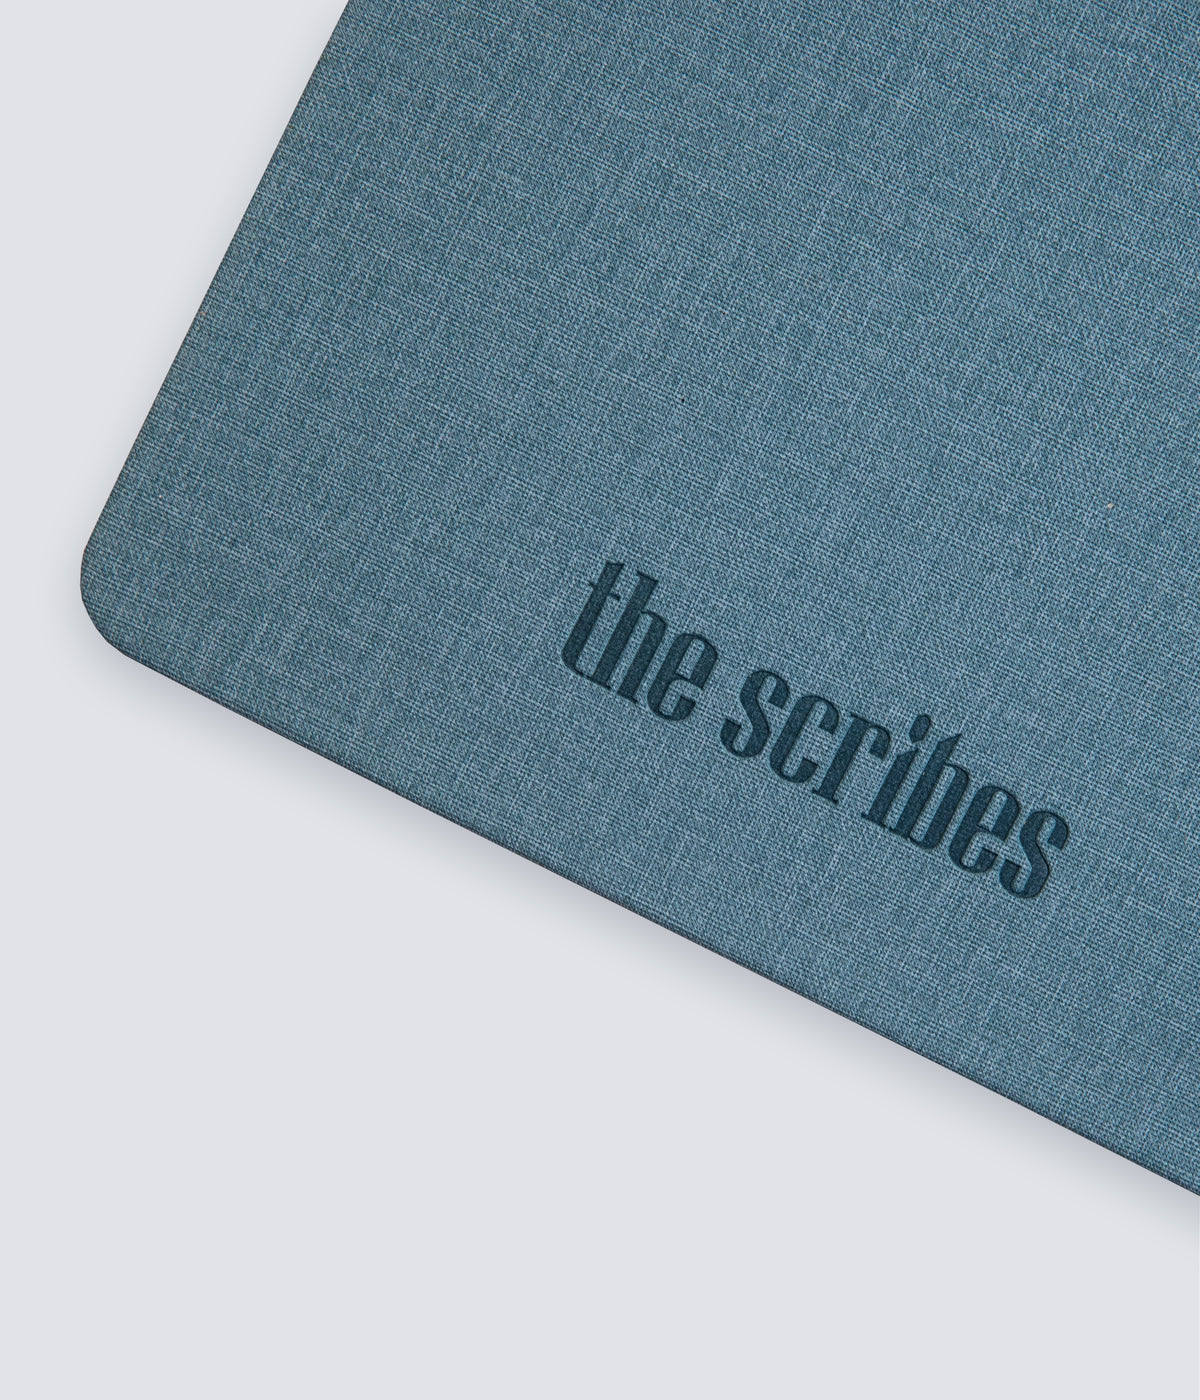 Wednesday Morning Scribe - The Scribes